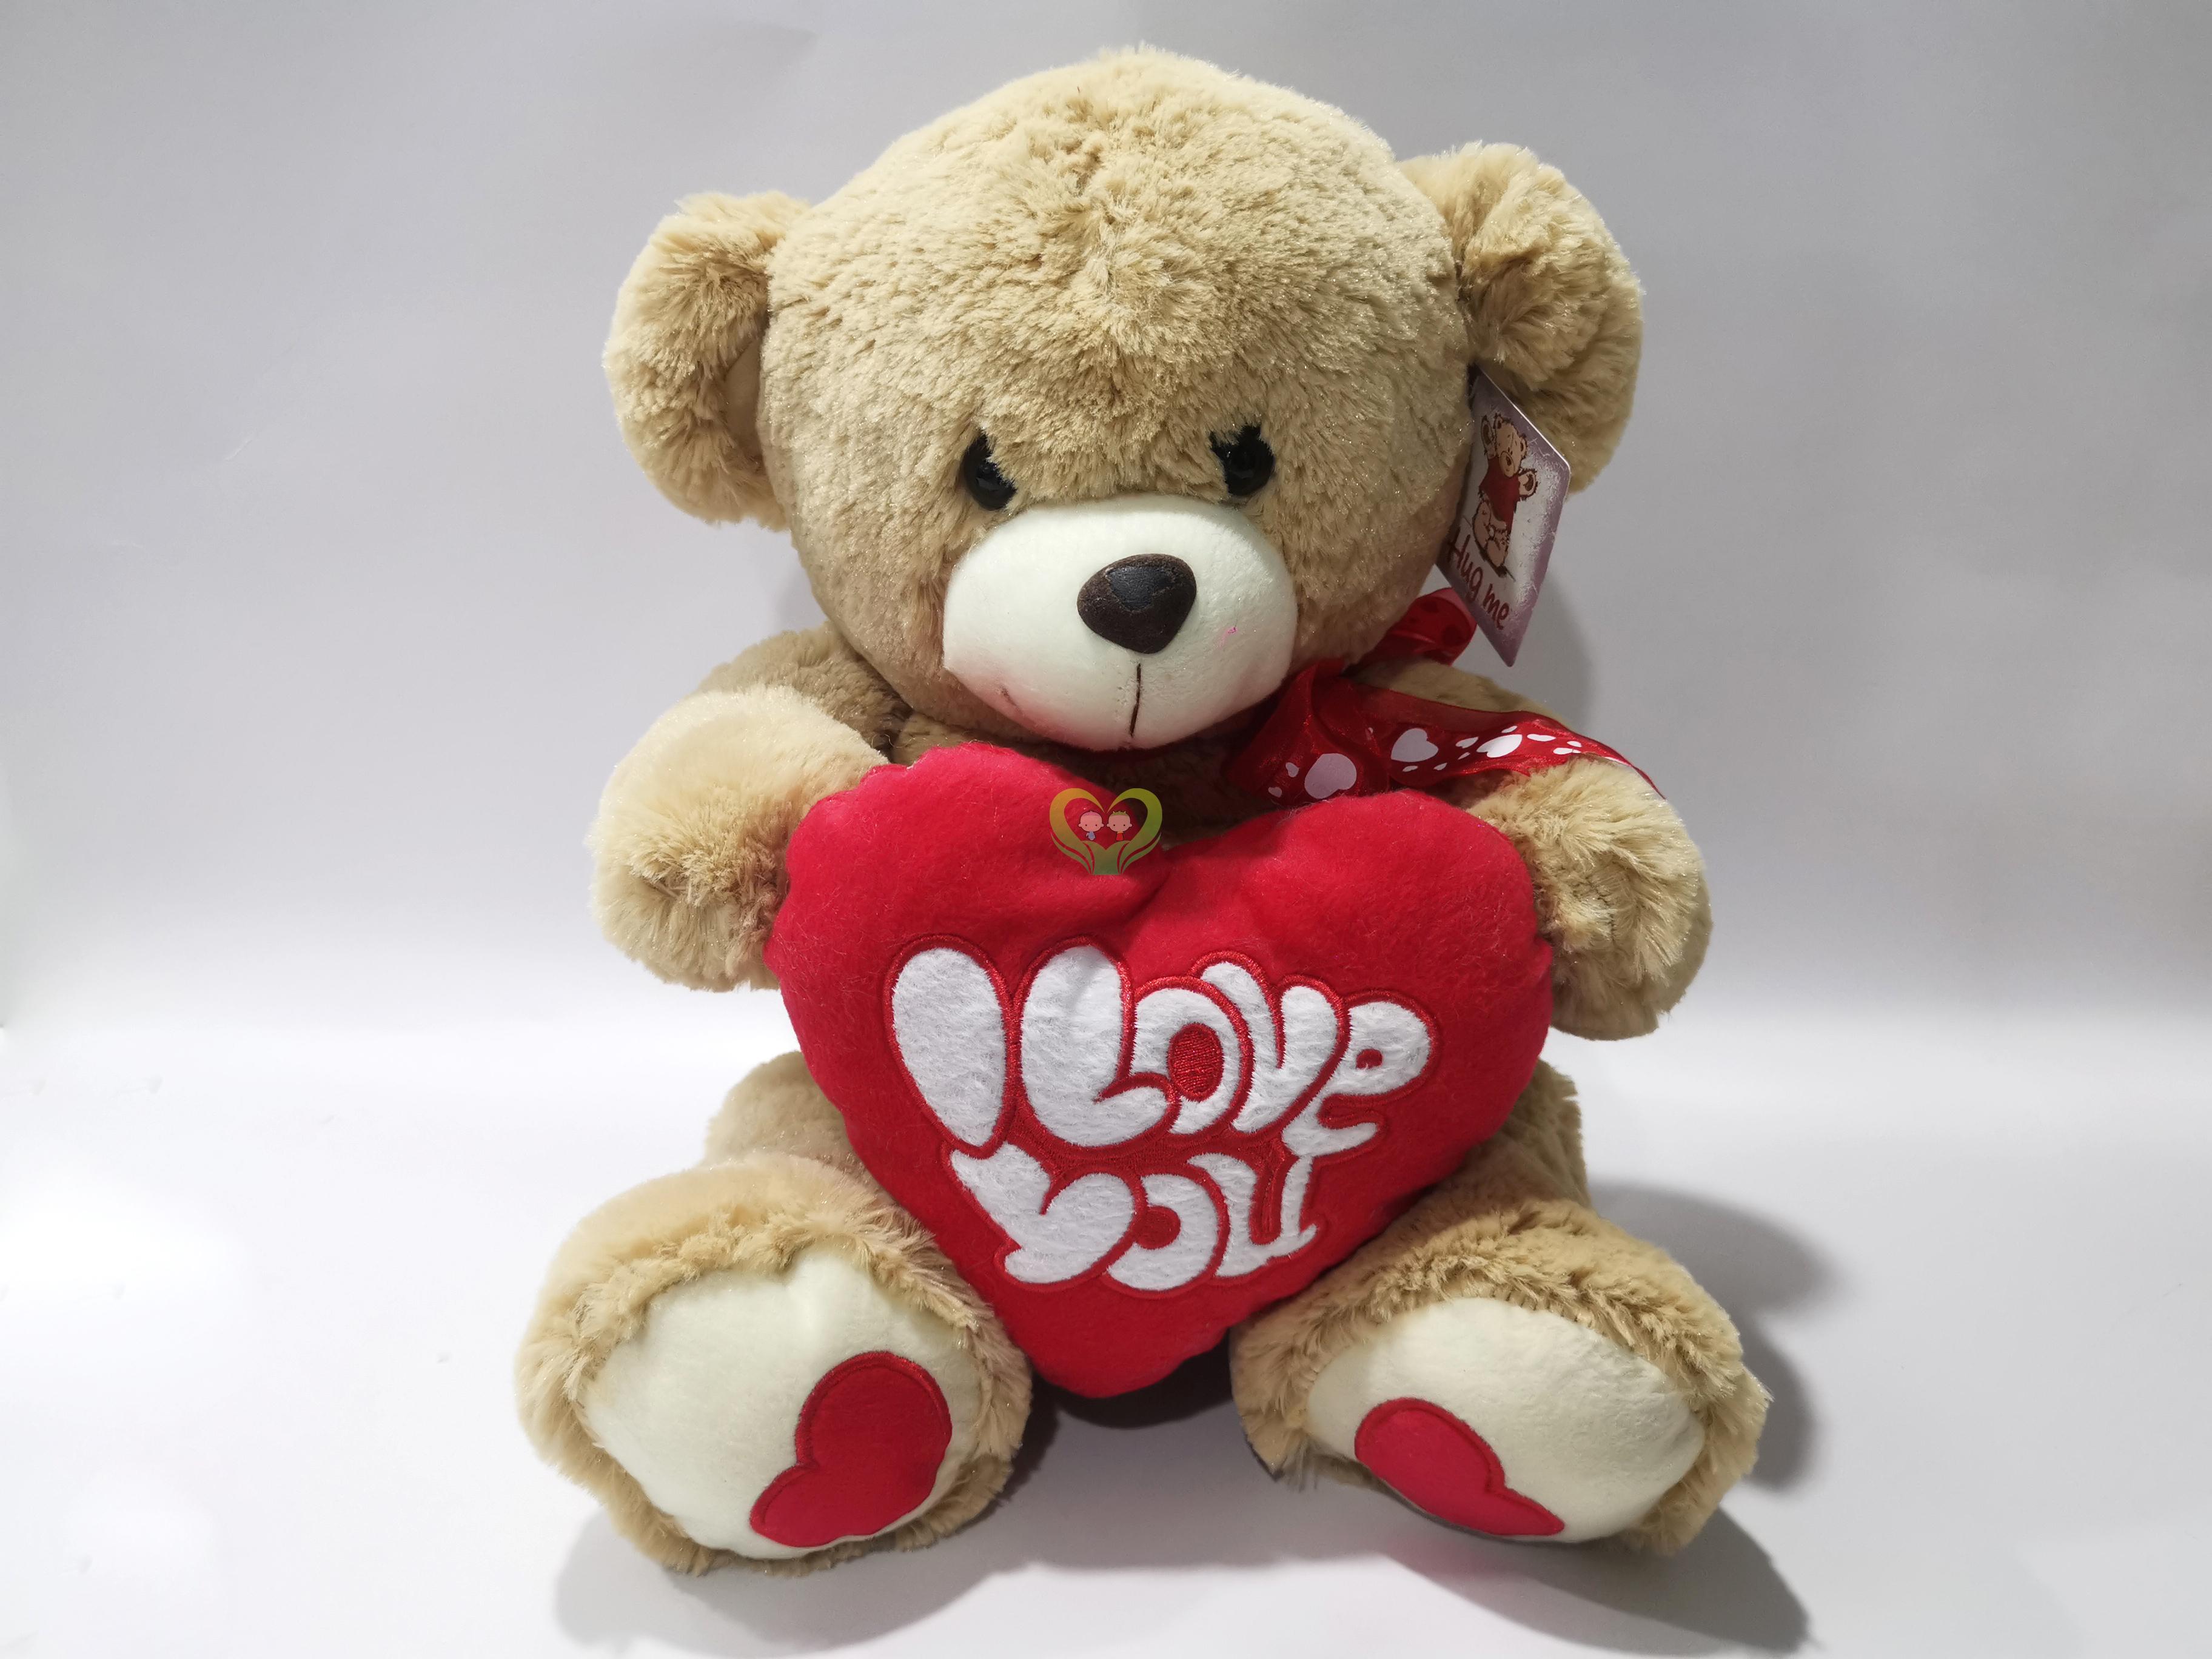 2019 Valentine Plush Toys: Bears with heart 